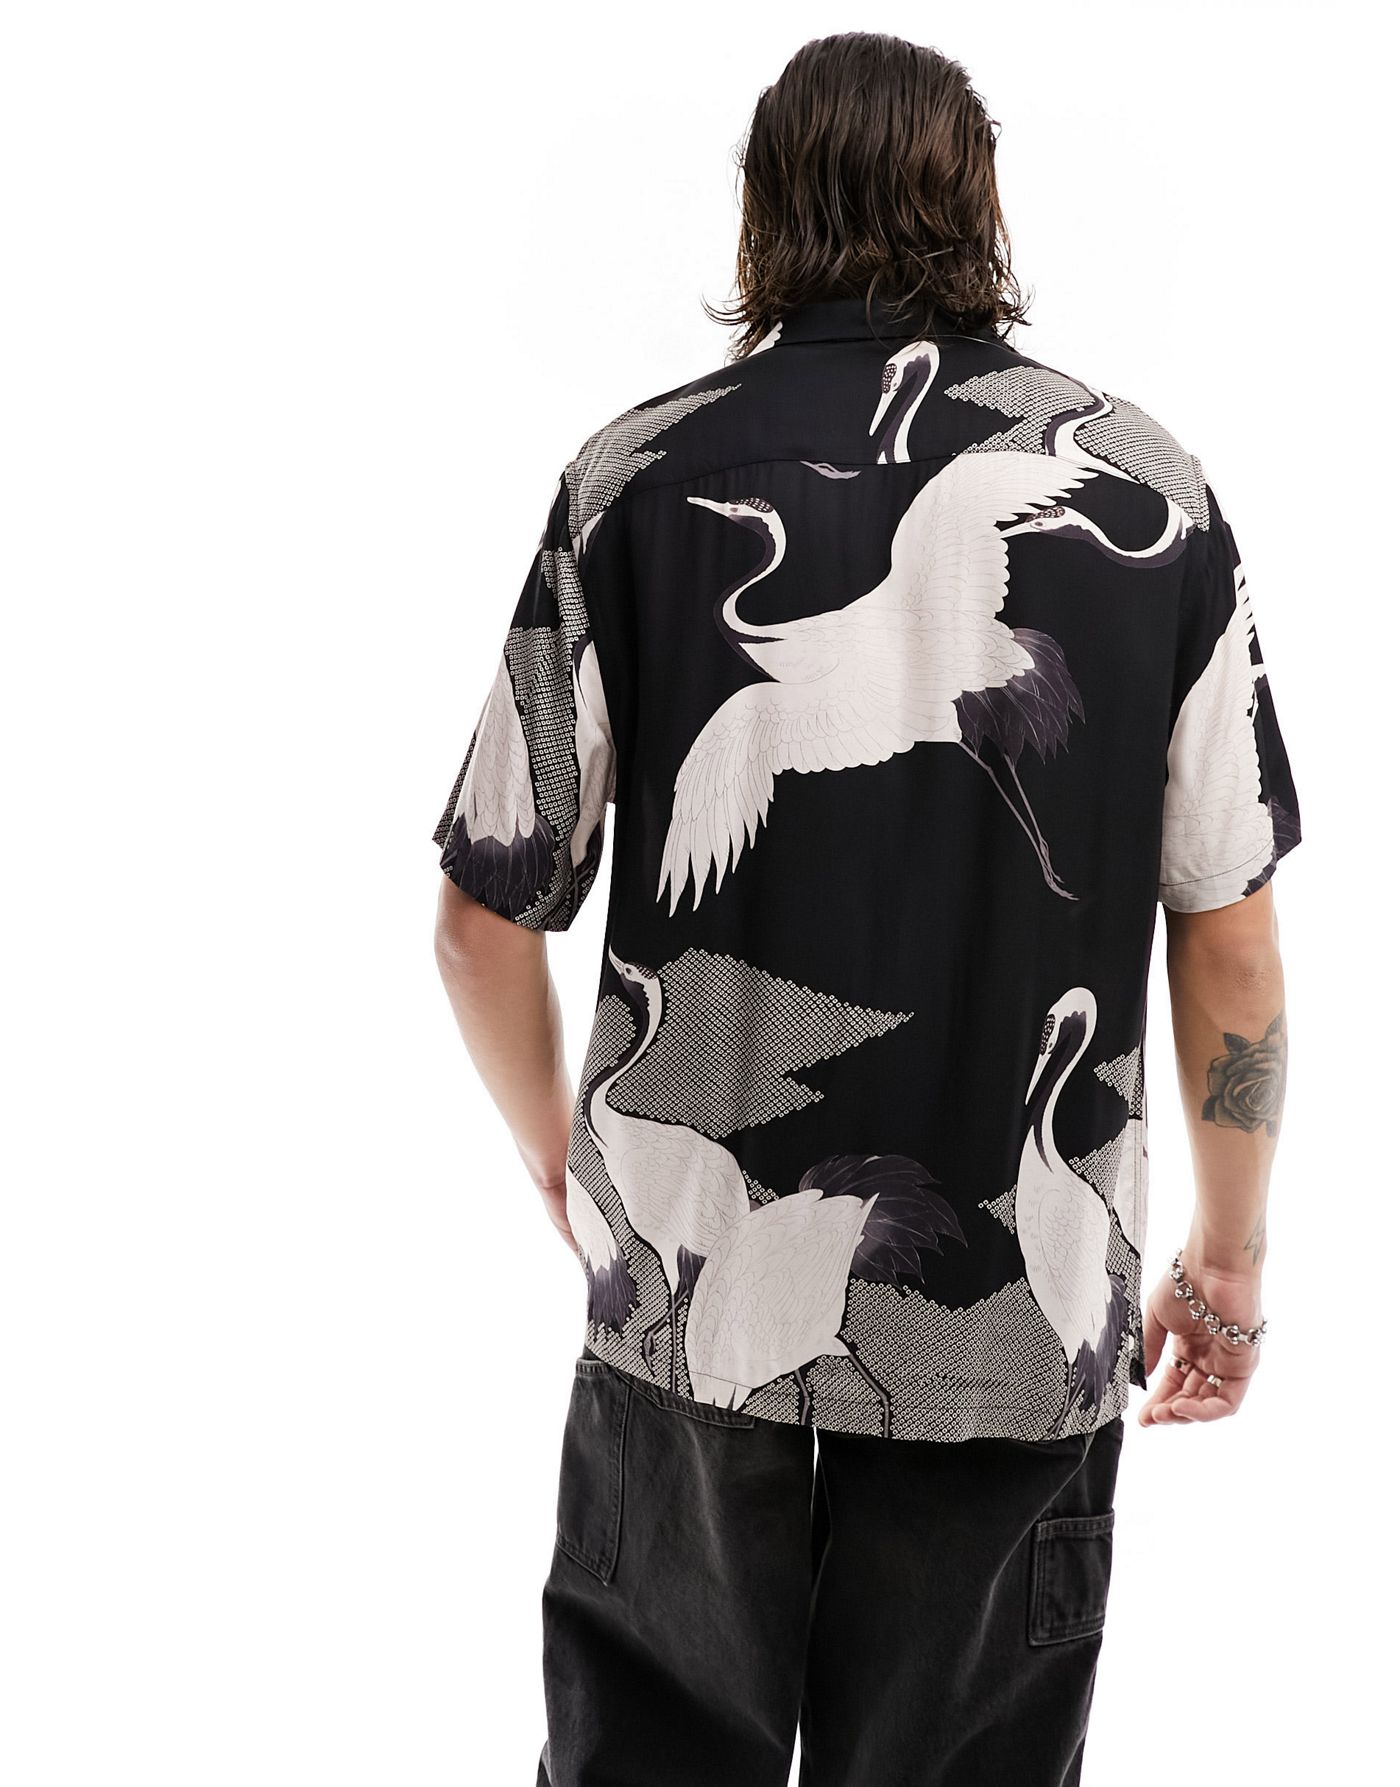 AllSaints Zikano short sleeve graphic shirt in black and white